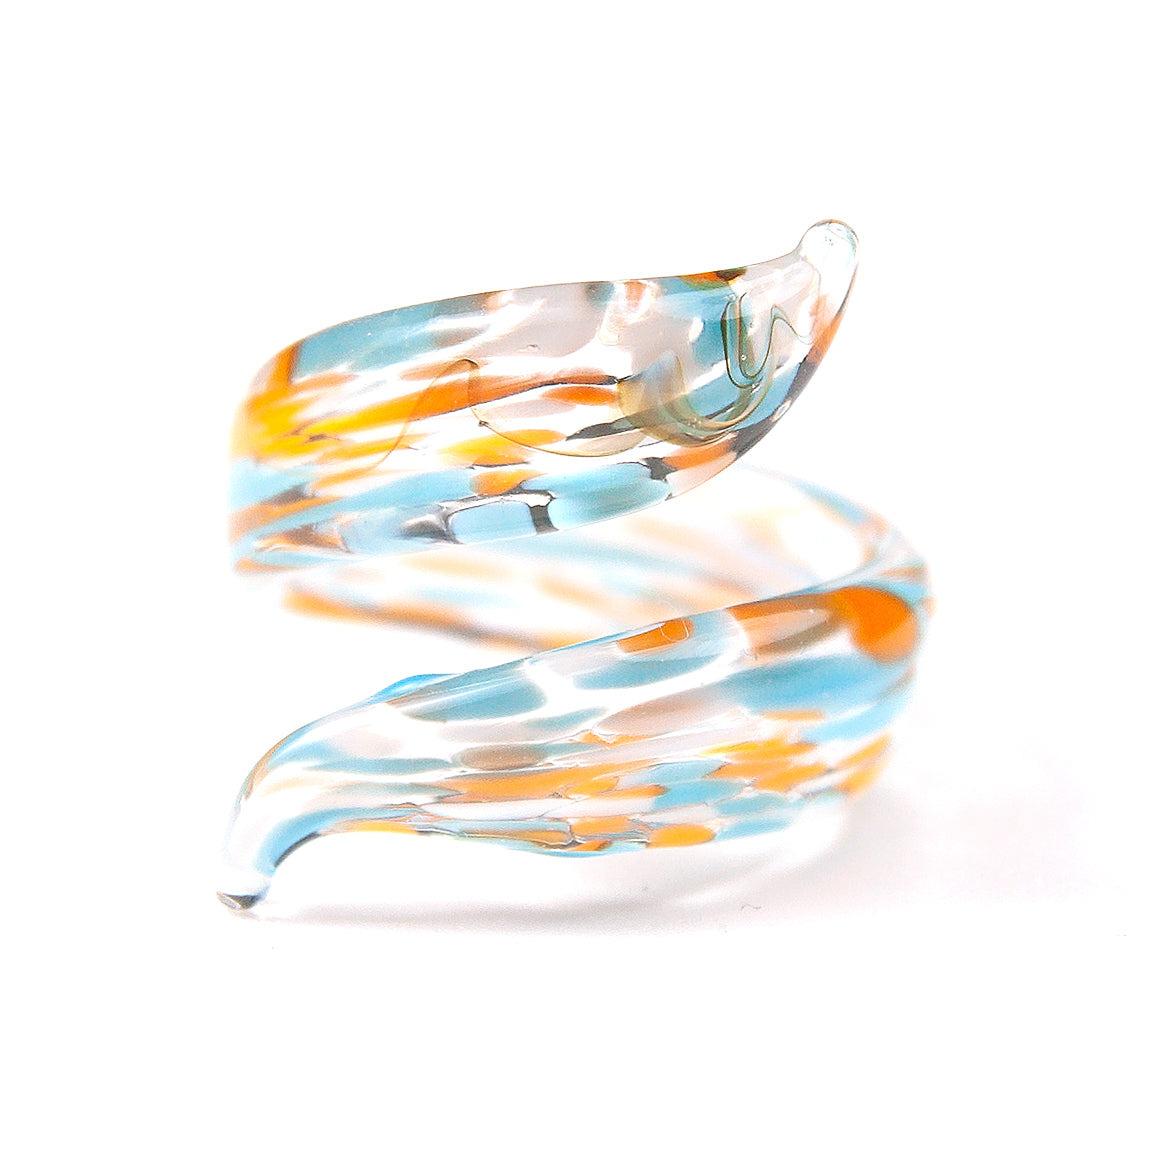 Sunny Sky Flame Ring